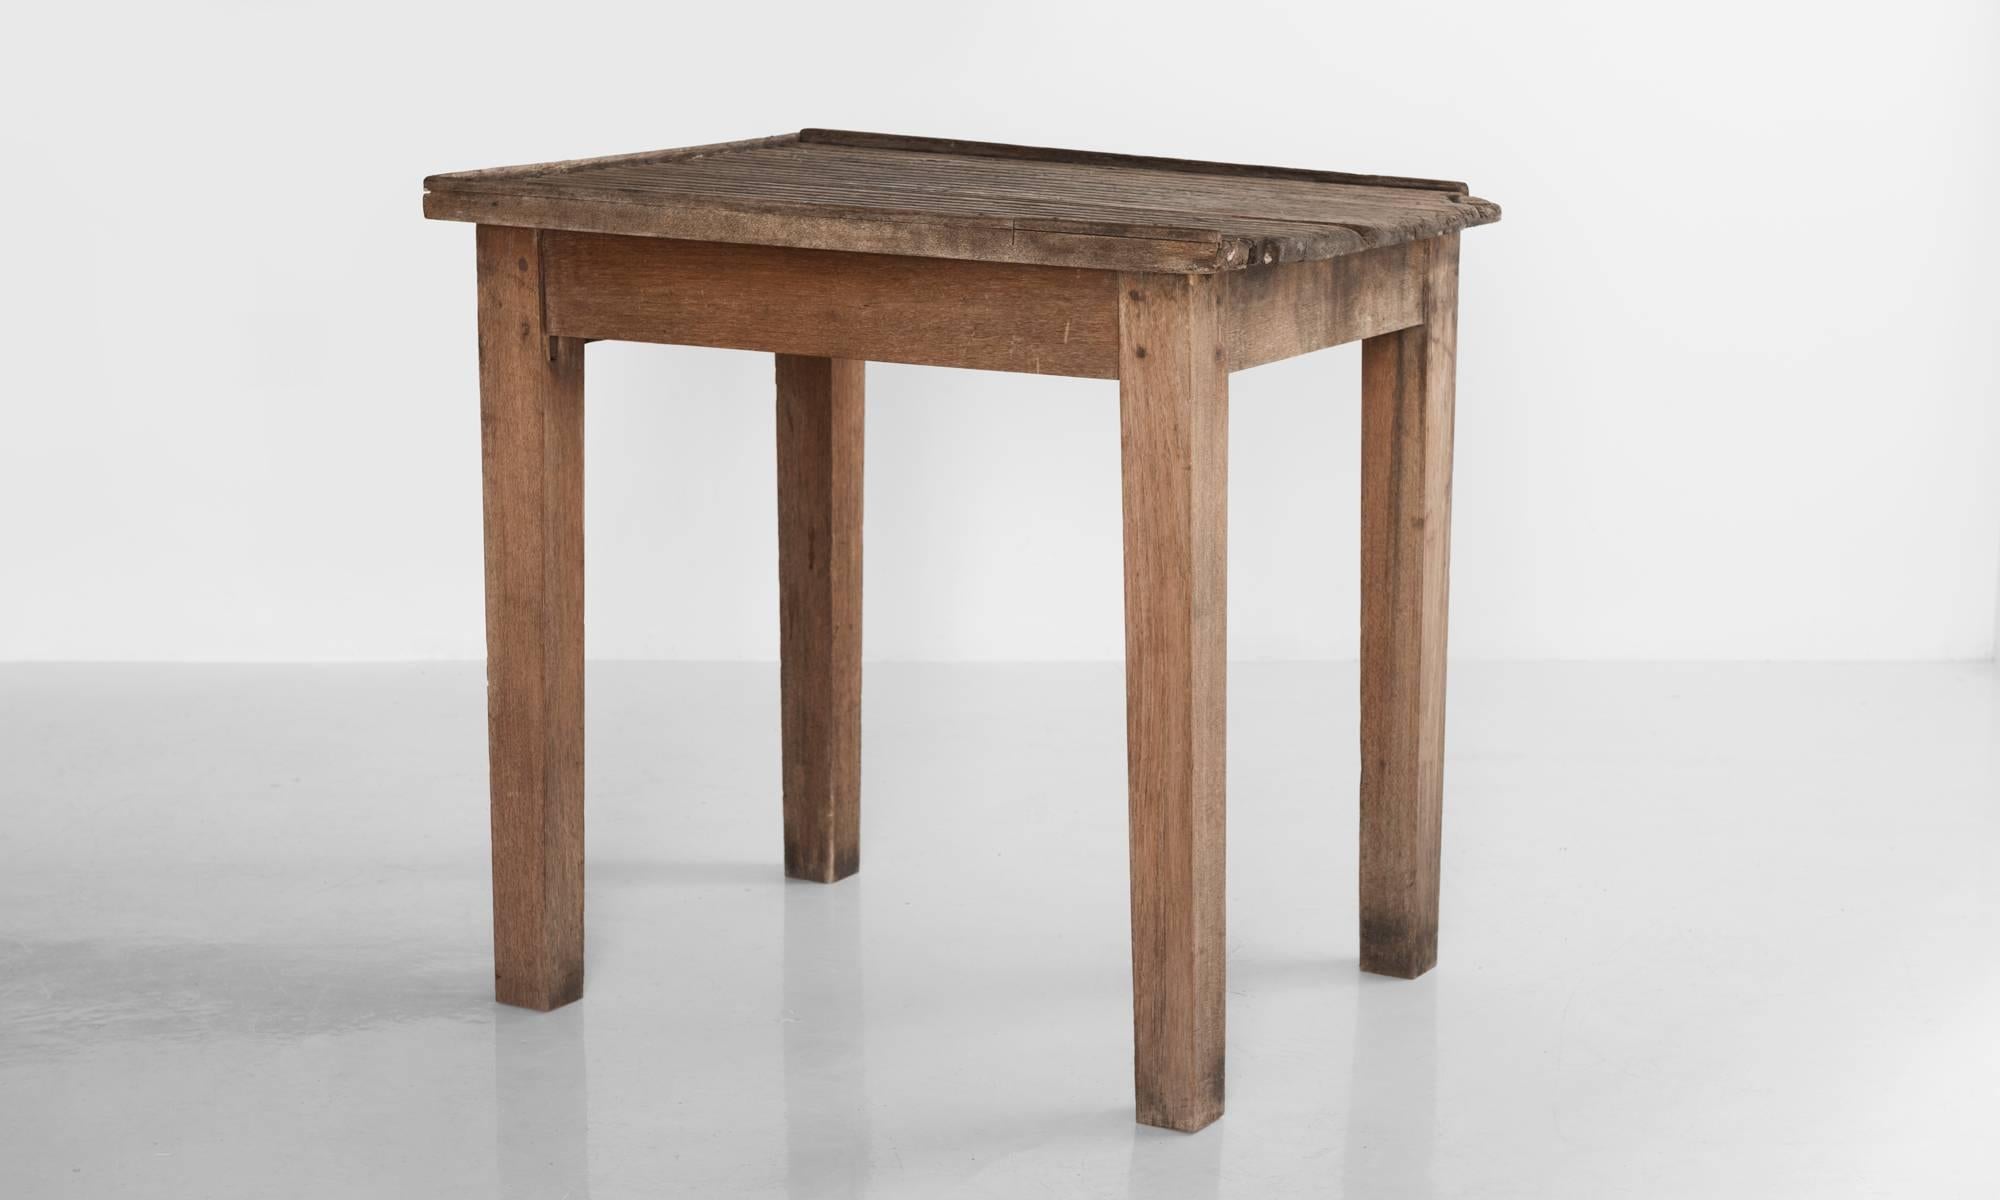 Unique oak tables, with well worn grooved surface for hand washing garments.